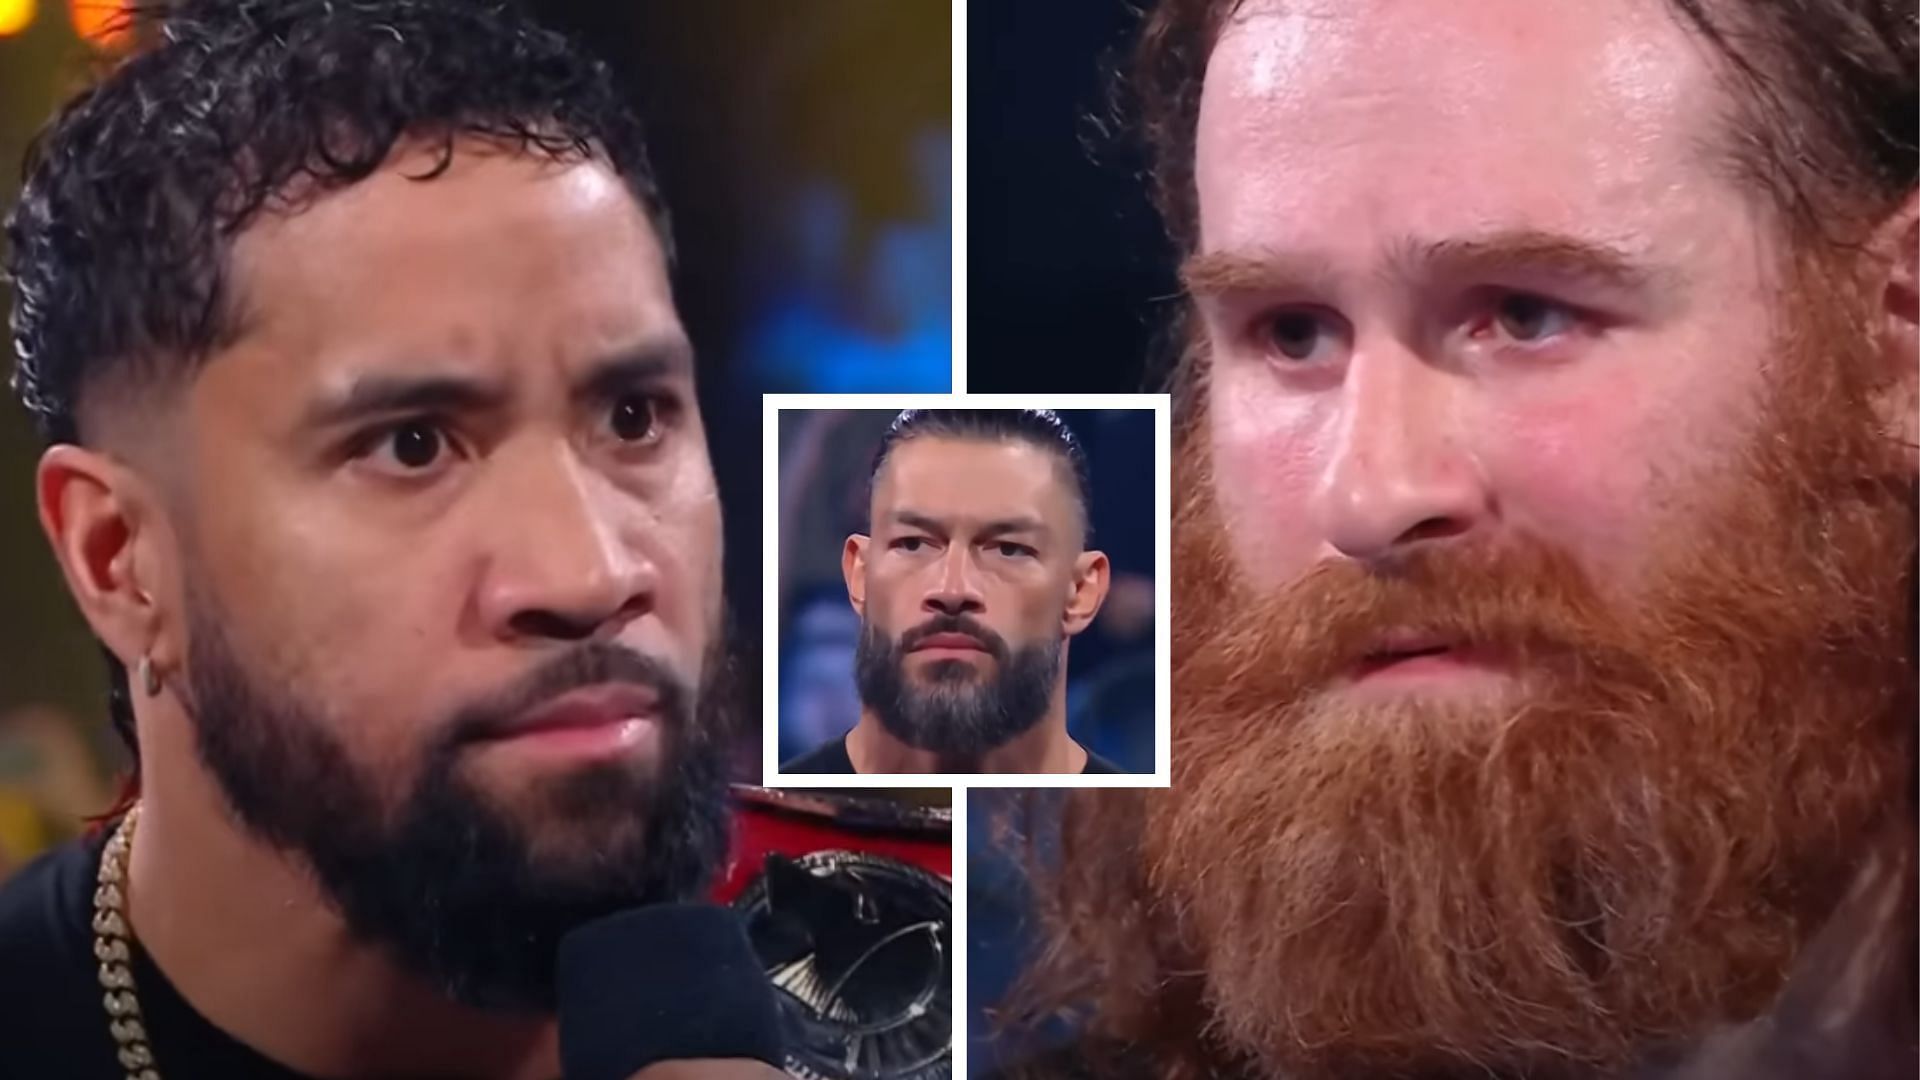 Jey Uso (left), Roman Reigns (center), and Sami Zayn (right)